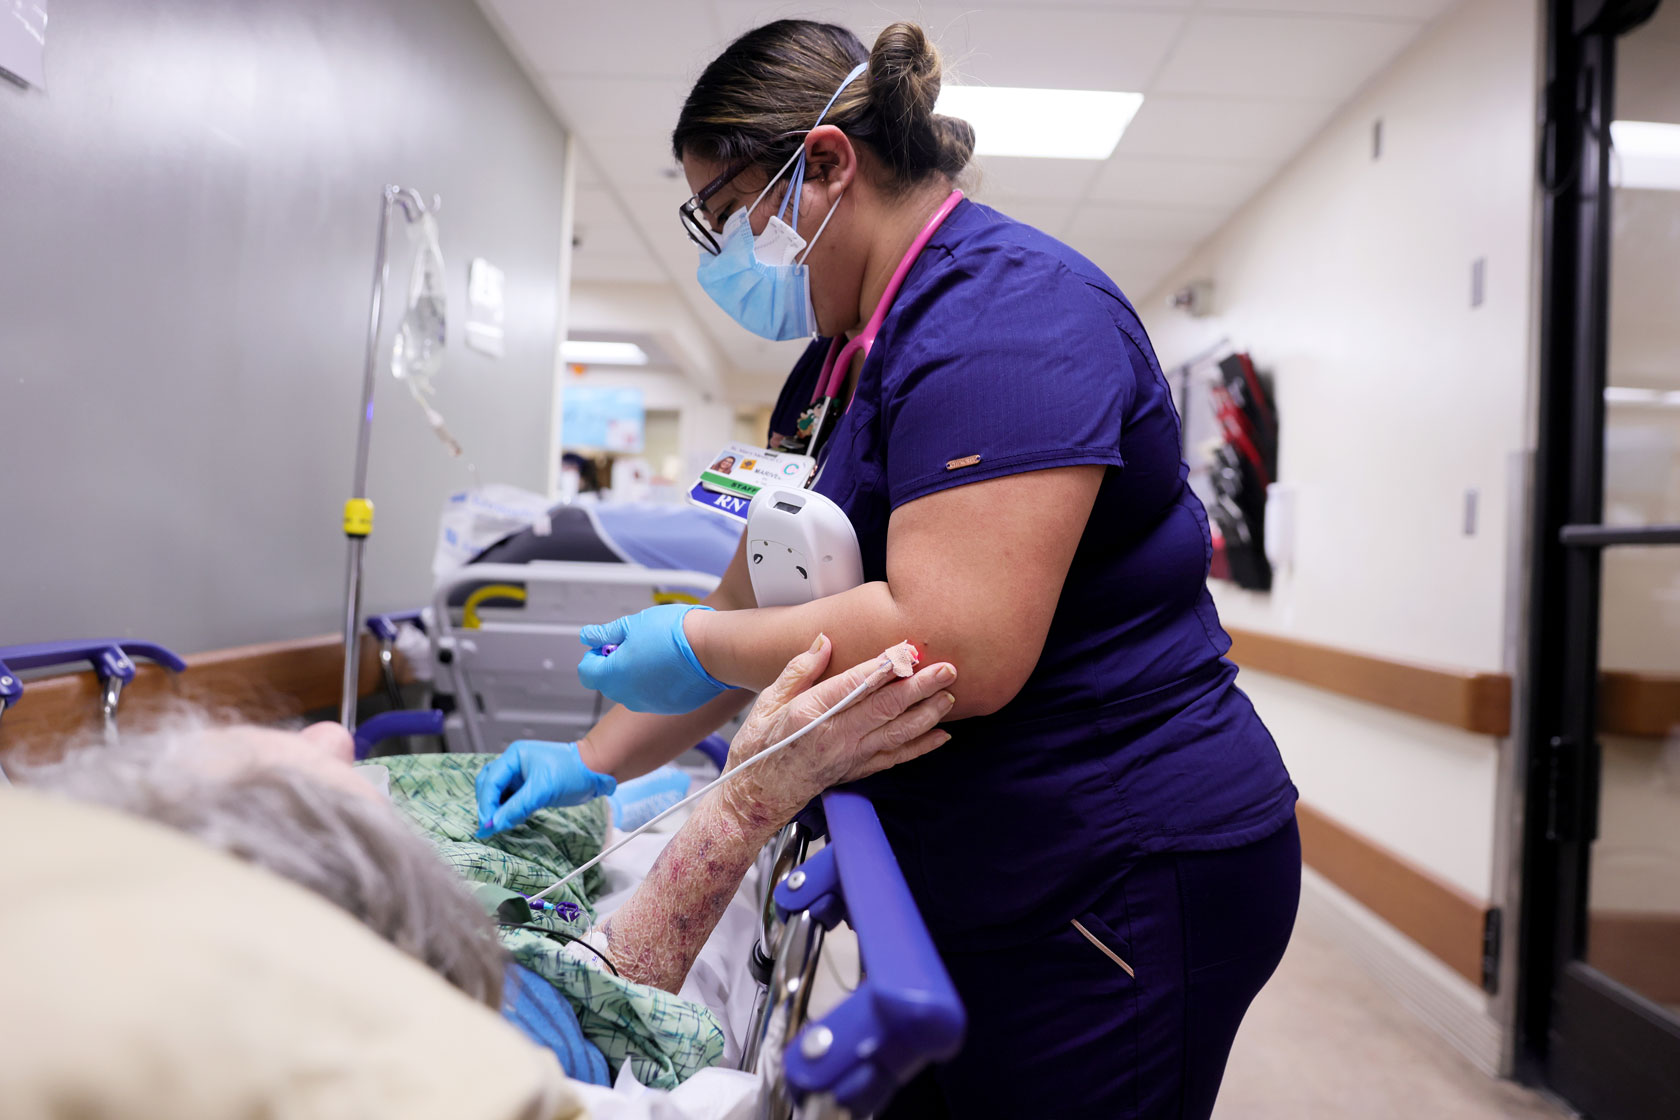 Photo shows a nurse in a purple shirt caring for a patient, who touches the nurse's arm with her hand.